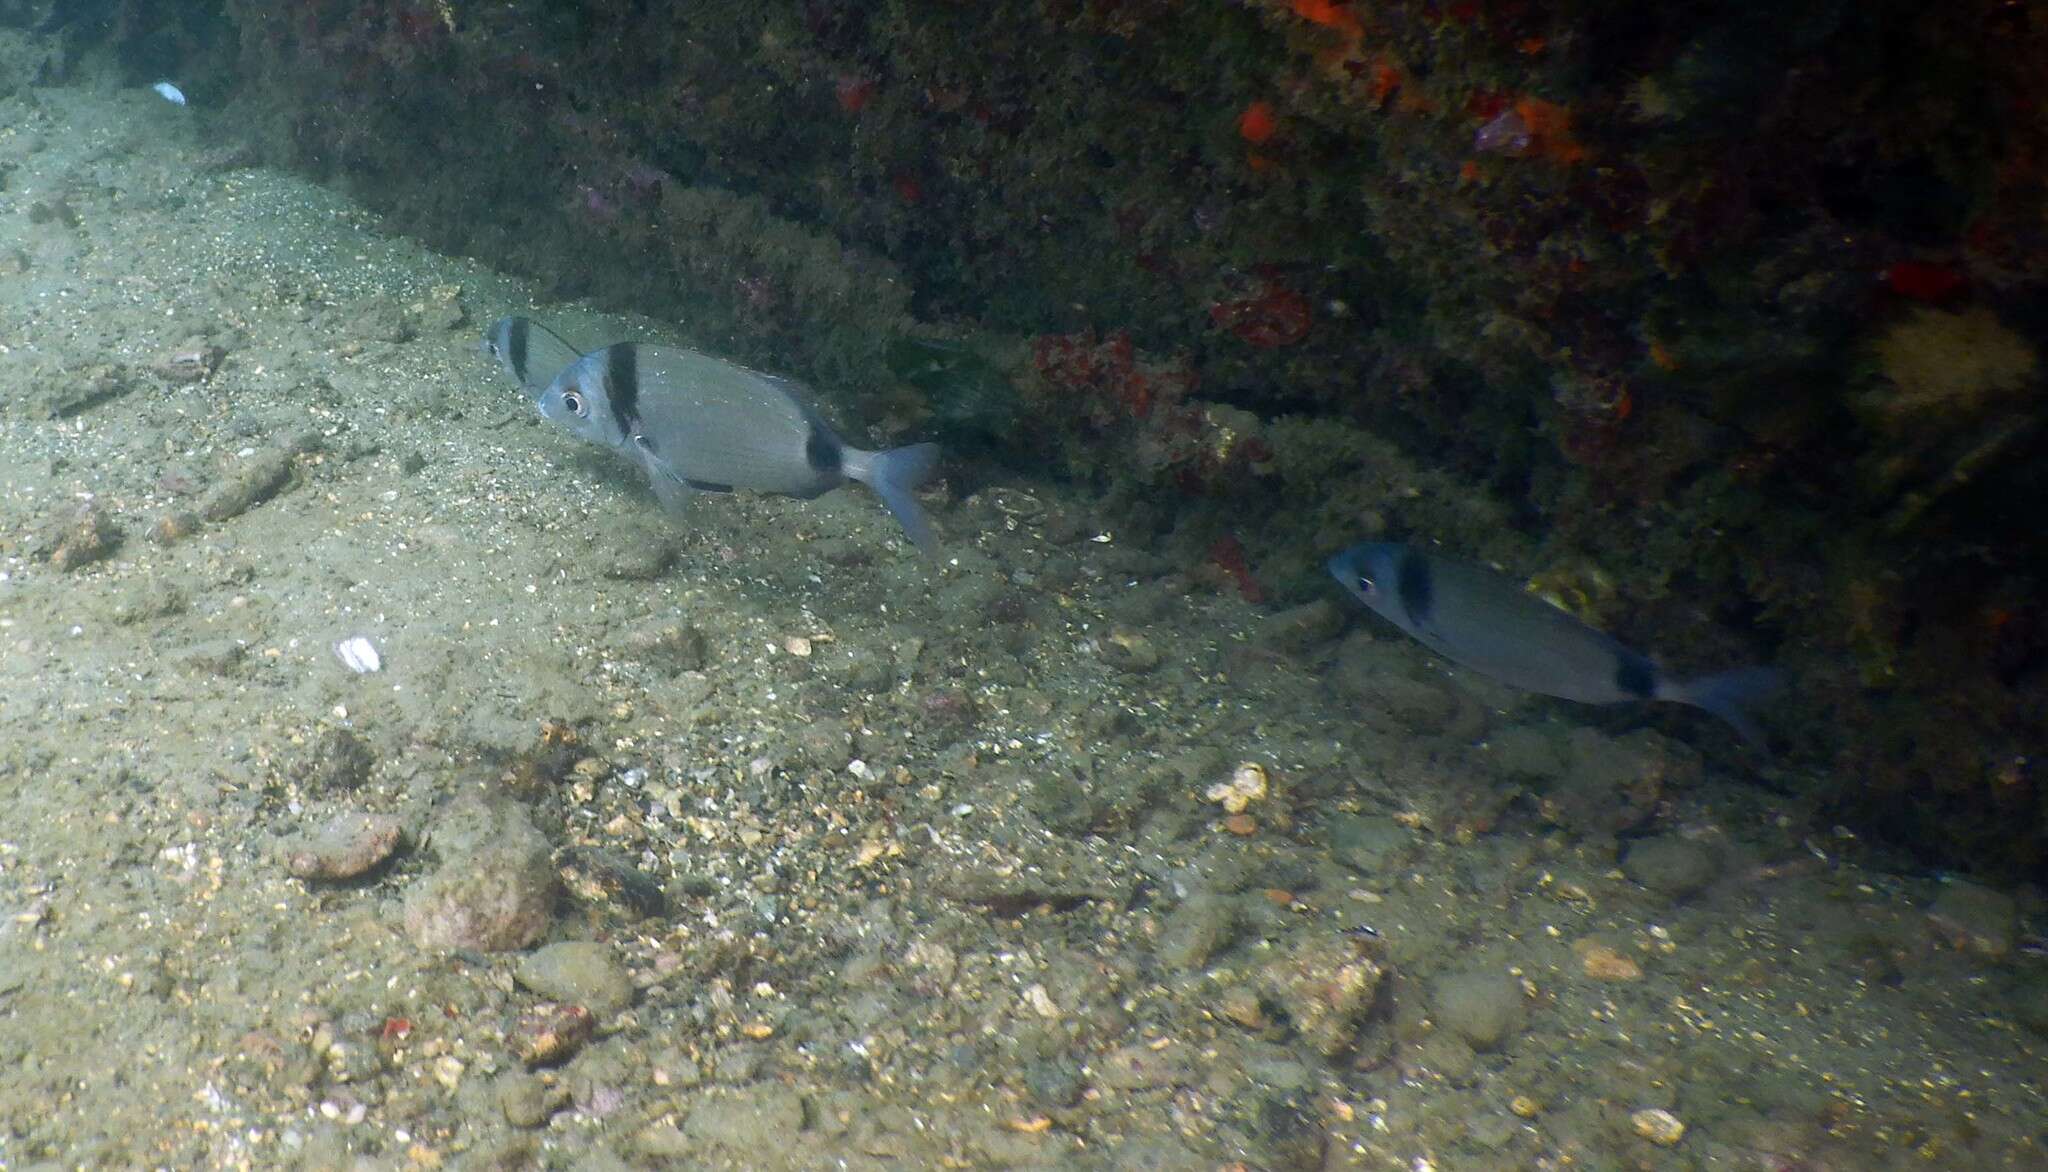 Image of Blacktail Bream